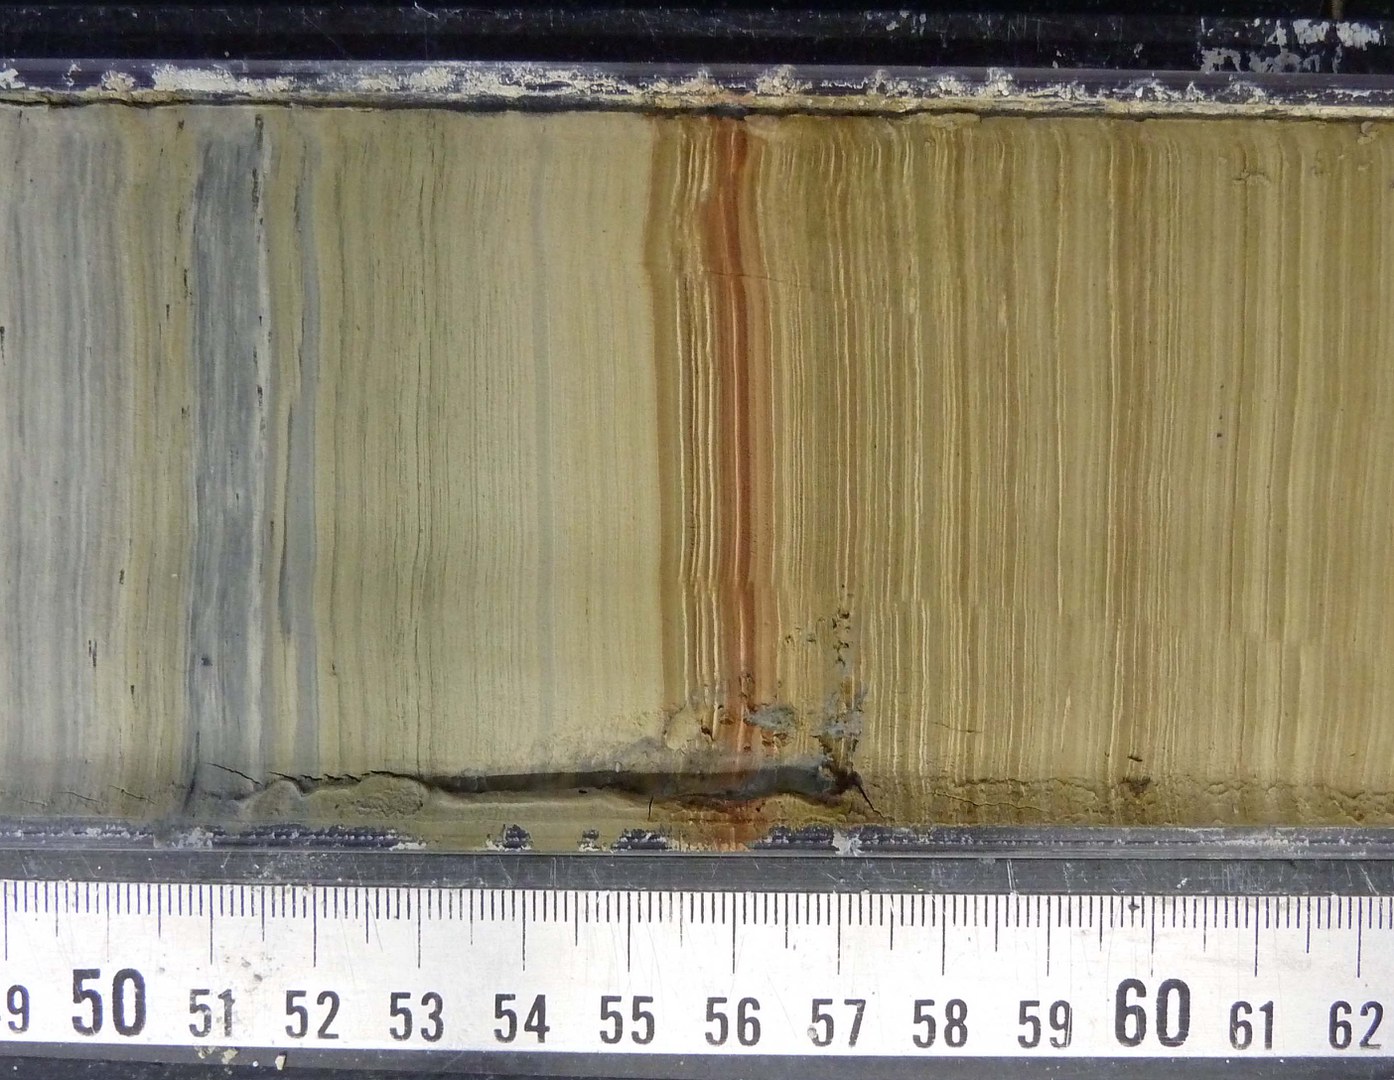 Varves in a drill core from Lake Van (Turkey):